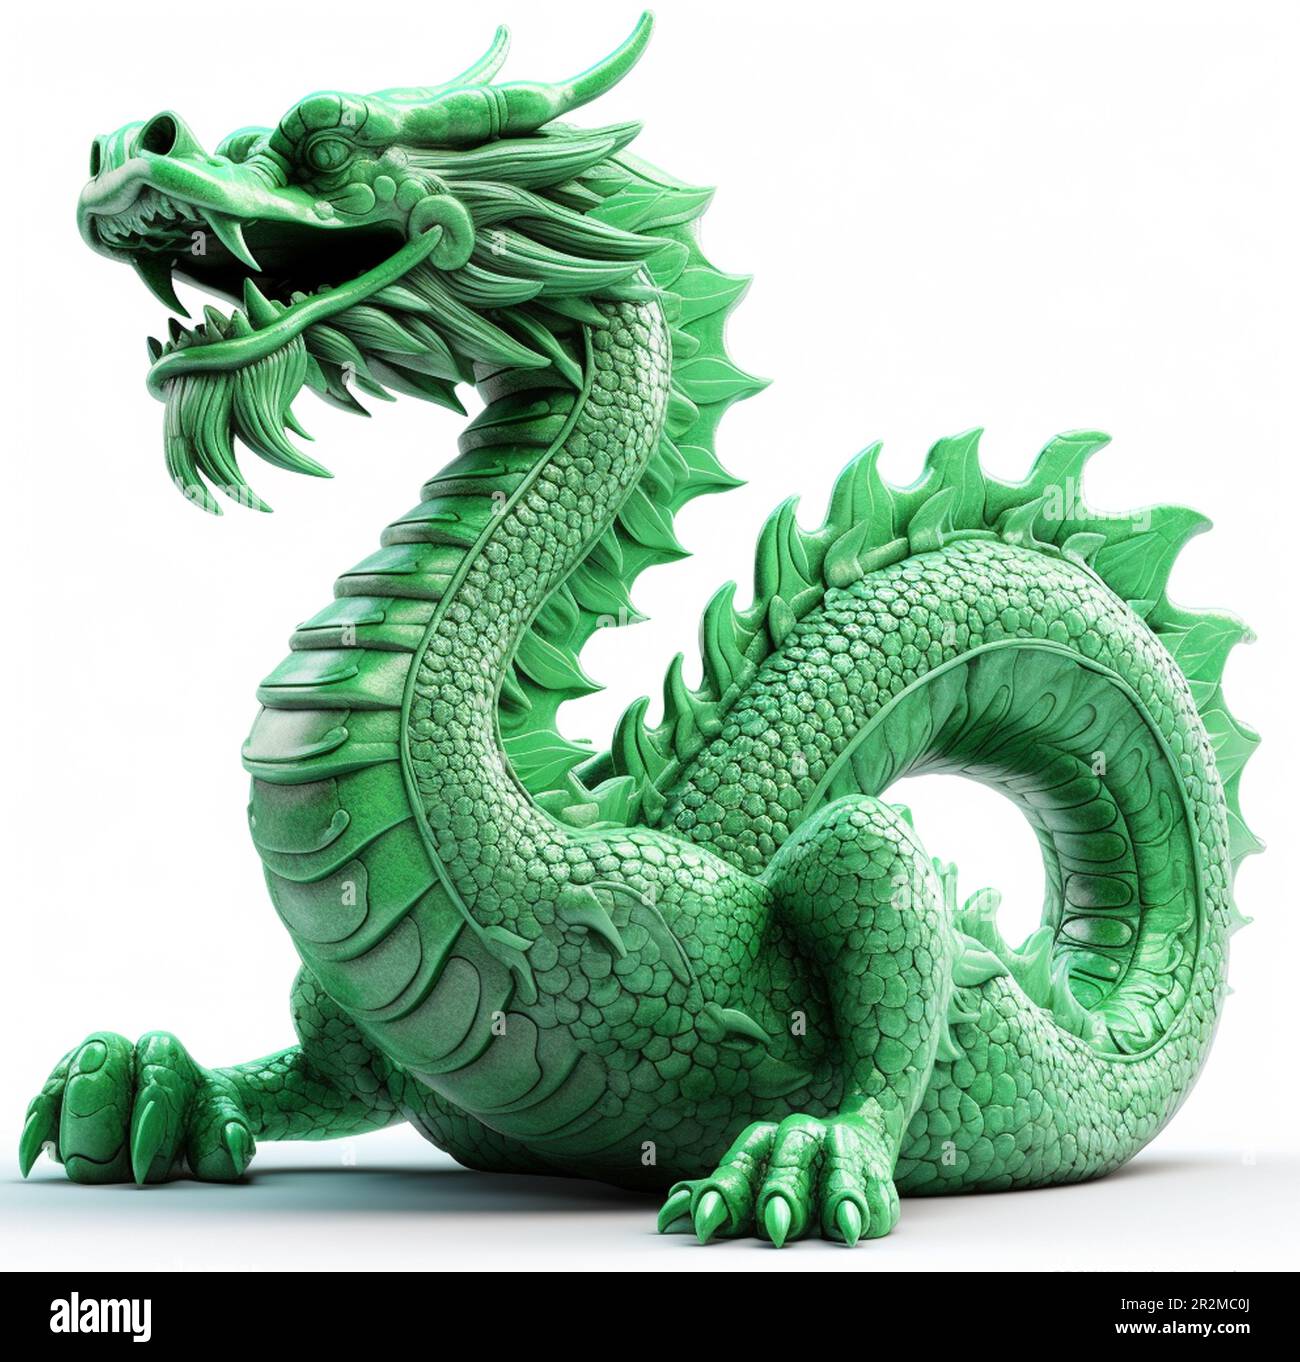 What is special about the Year of the Wood Dragon 2024? : r